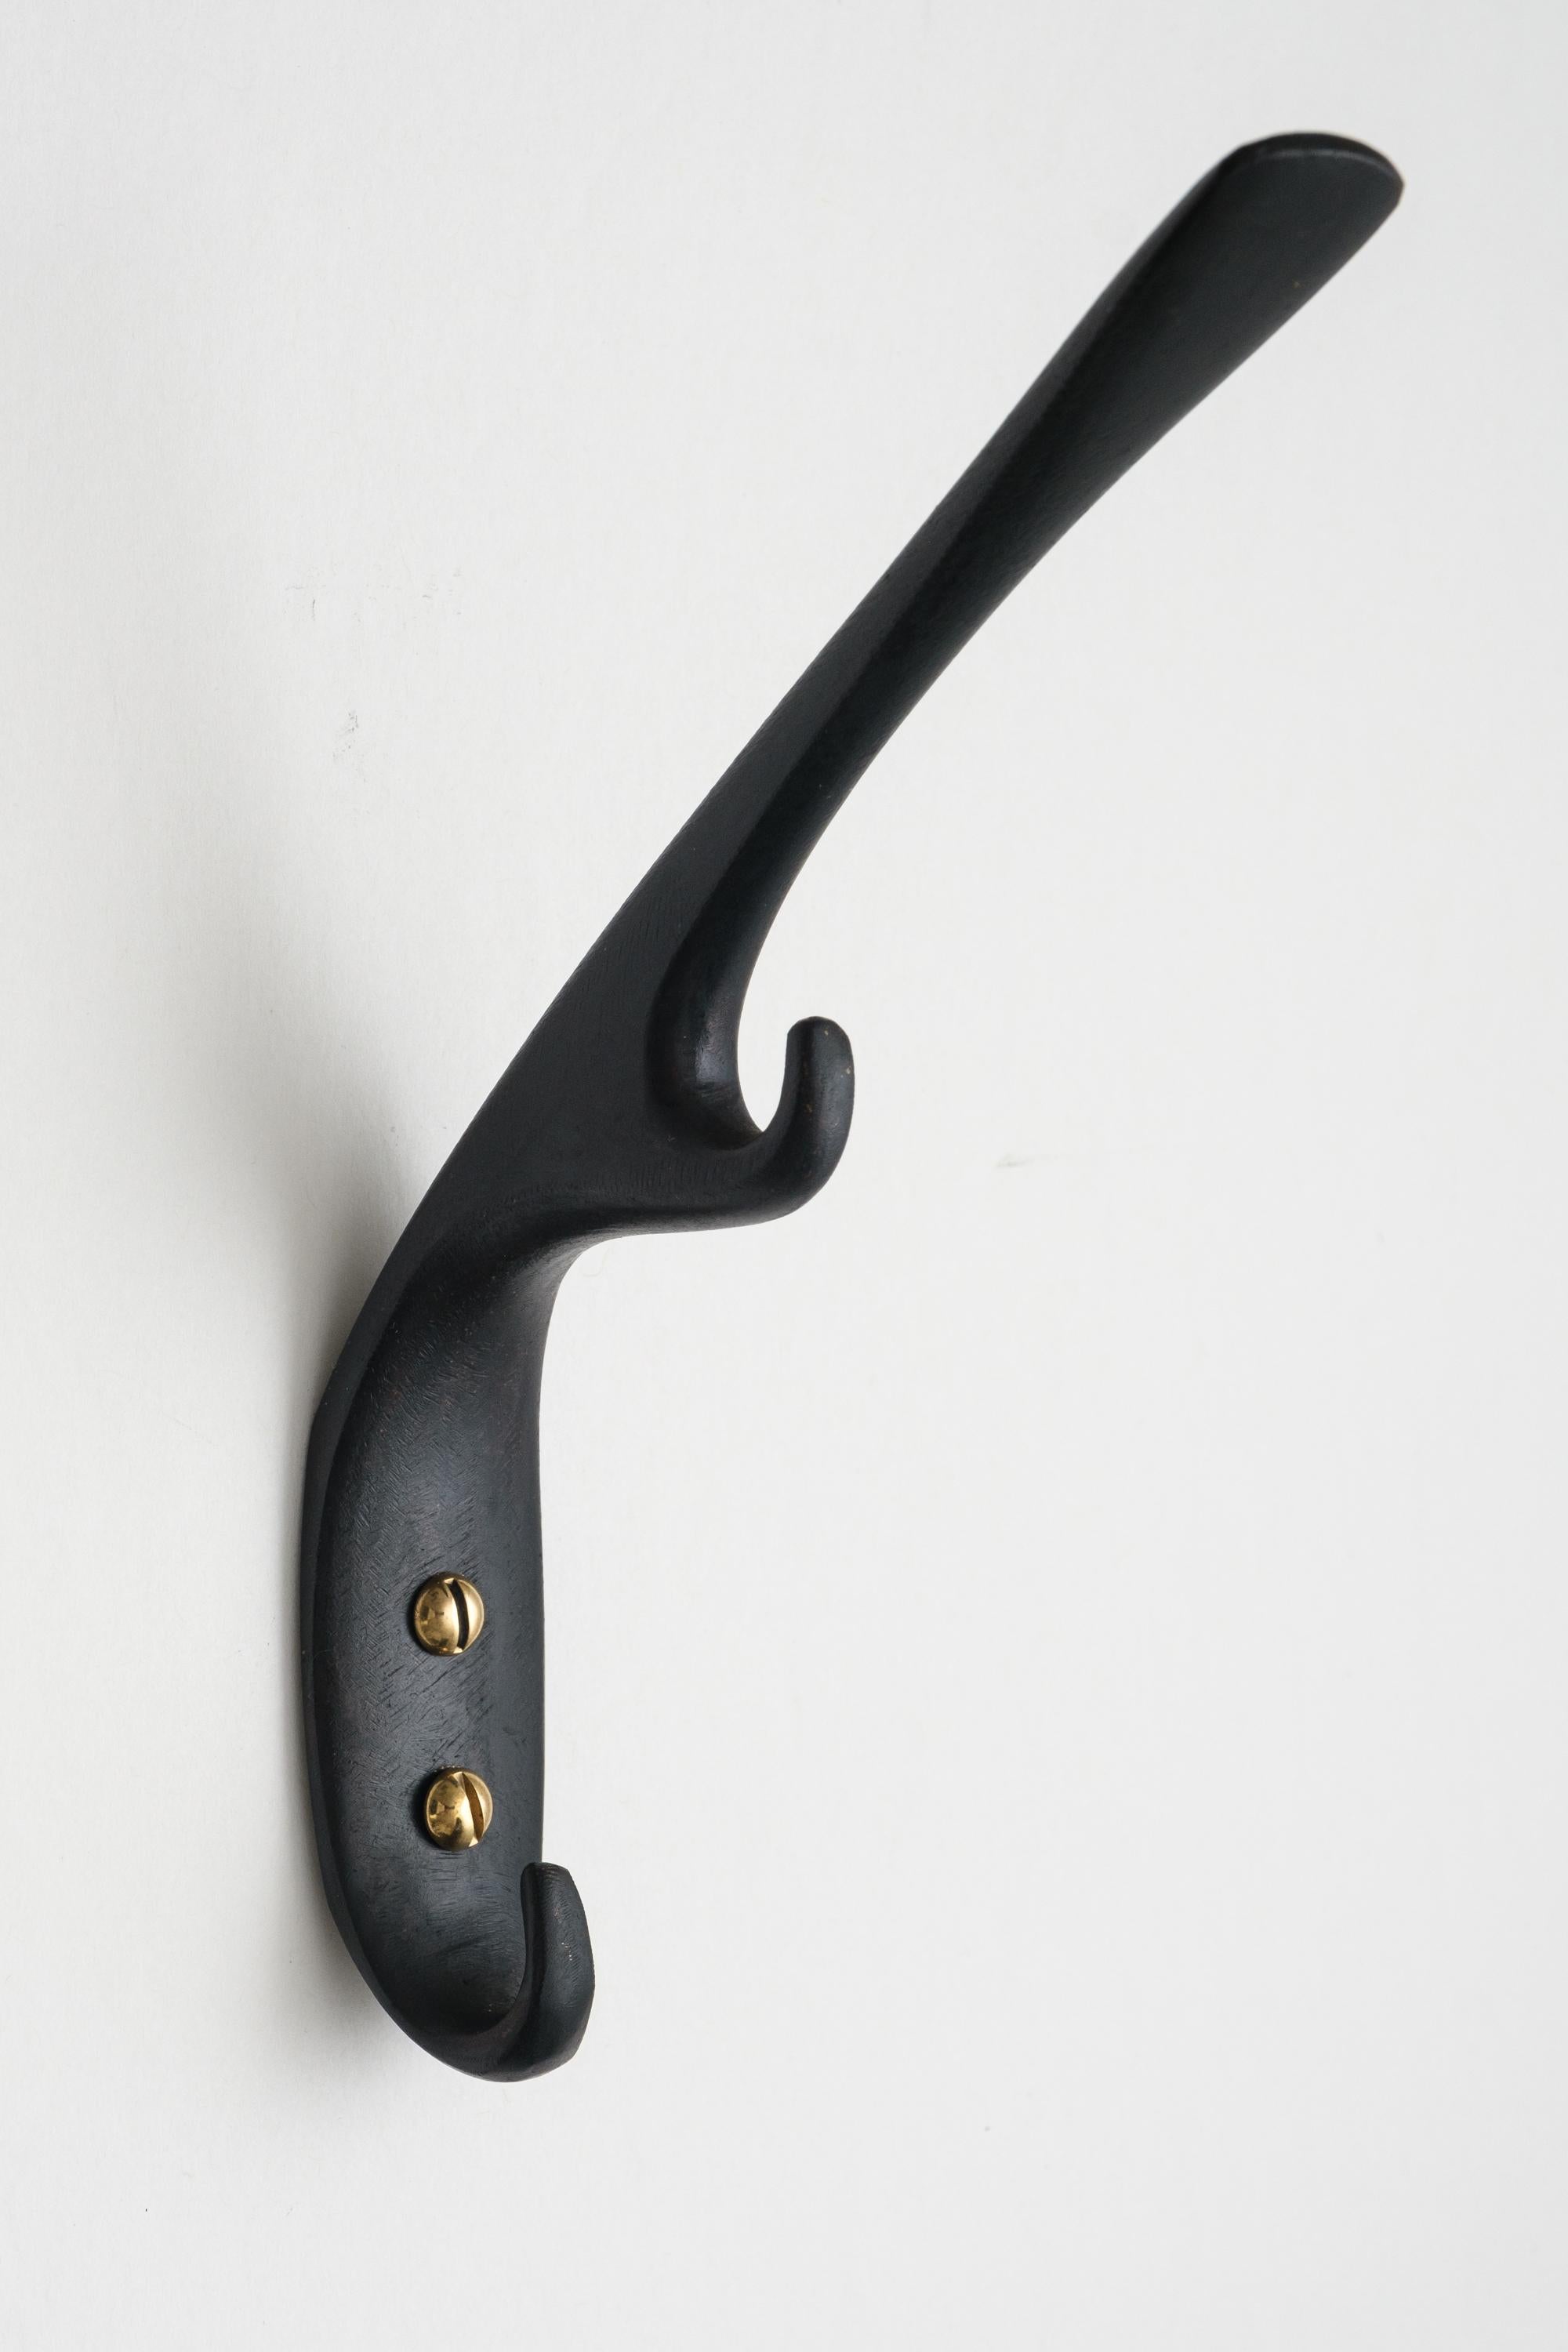 Carl Auböck #5439 patinated brass hook. Designed in the 1950s, this versatile and Minimalist Viennese hook is executed in darkly patinated and polished brass by Werkstätte Carl Auböck, Austria.

Produced by Carl Auböck IV in the original Auböck